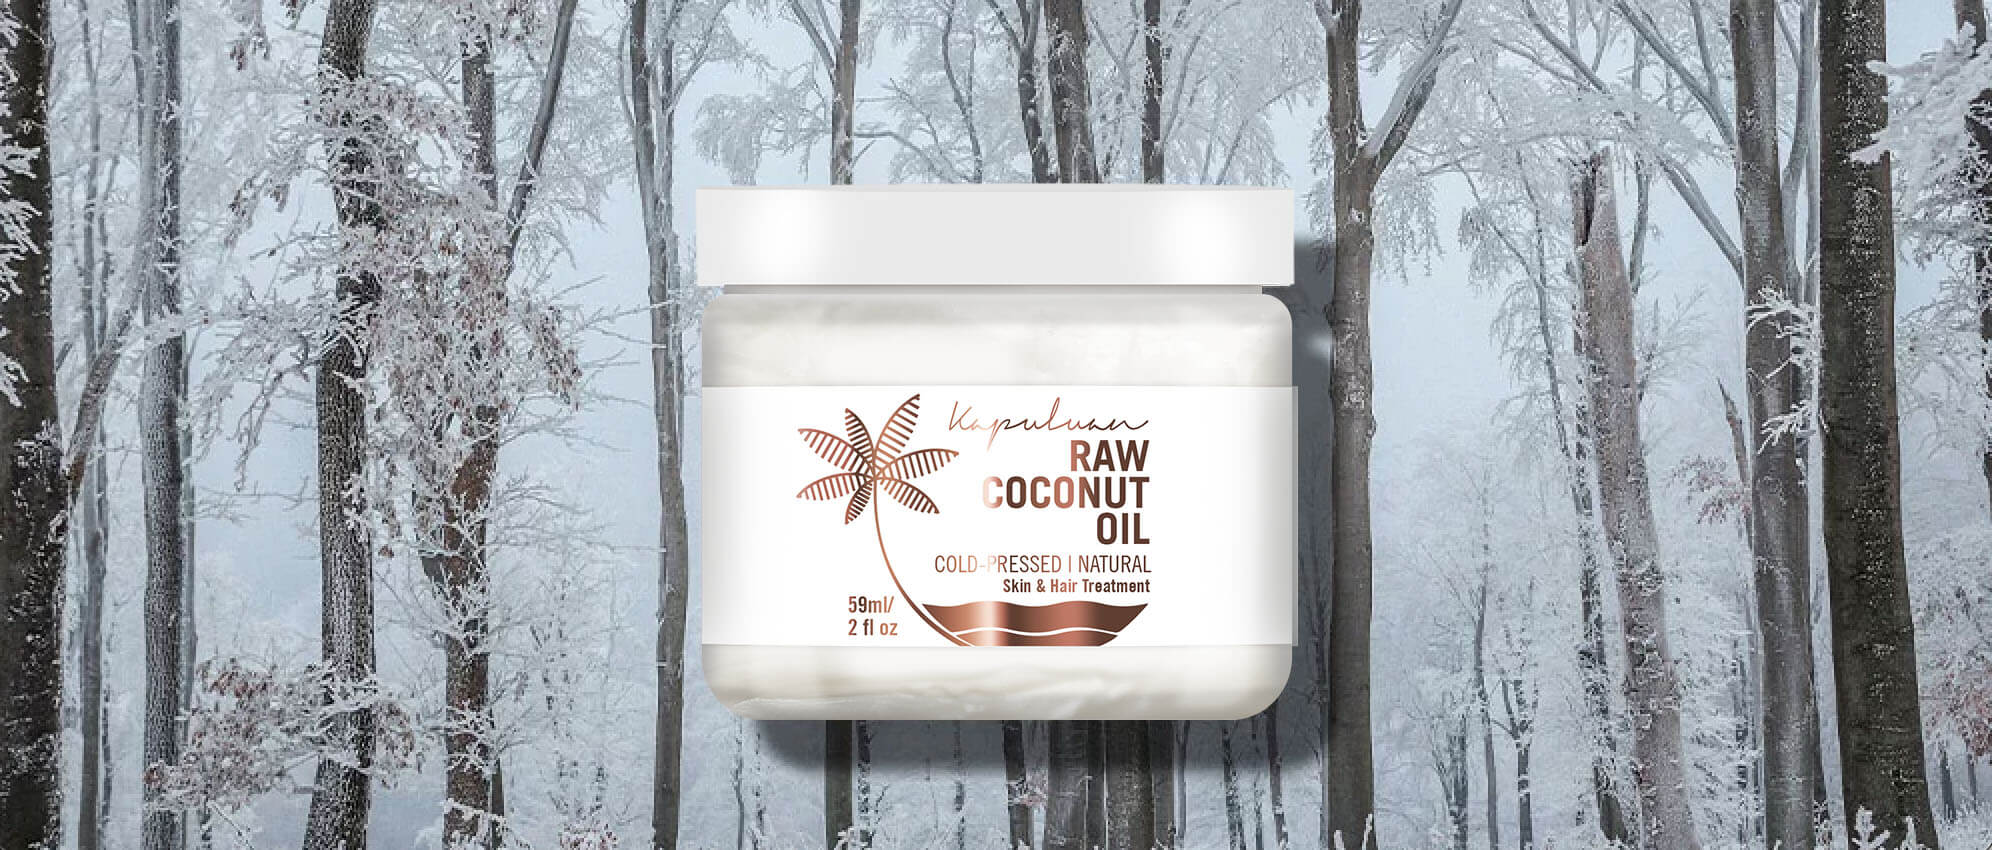 A jar of raw coconut oil superimposed on a snowy forest background with white, frosted trees. the label on the jar includes the product name and details.